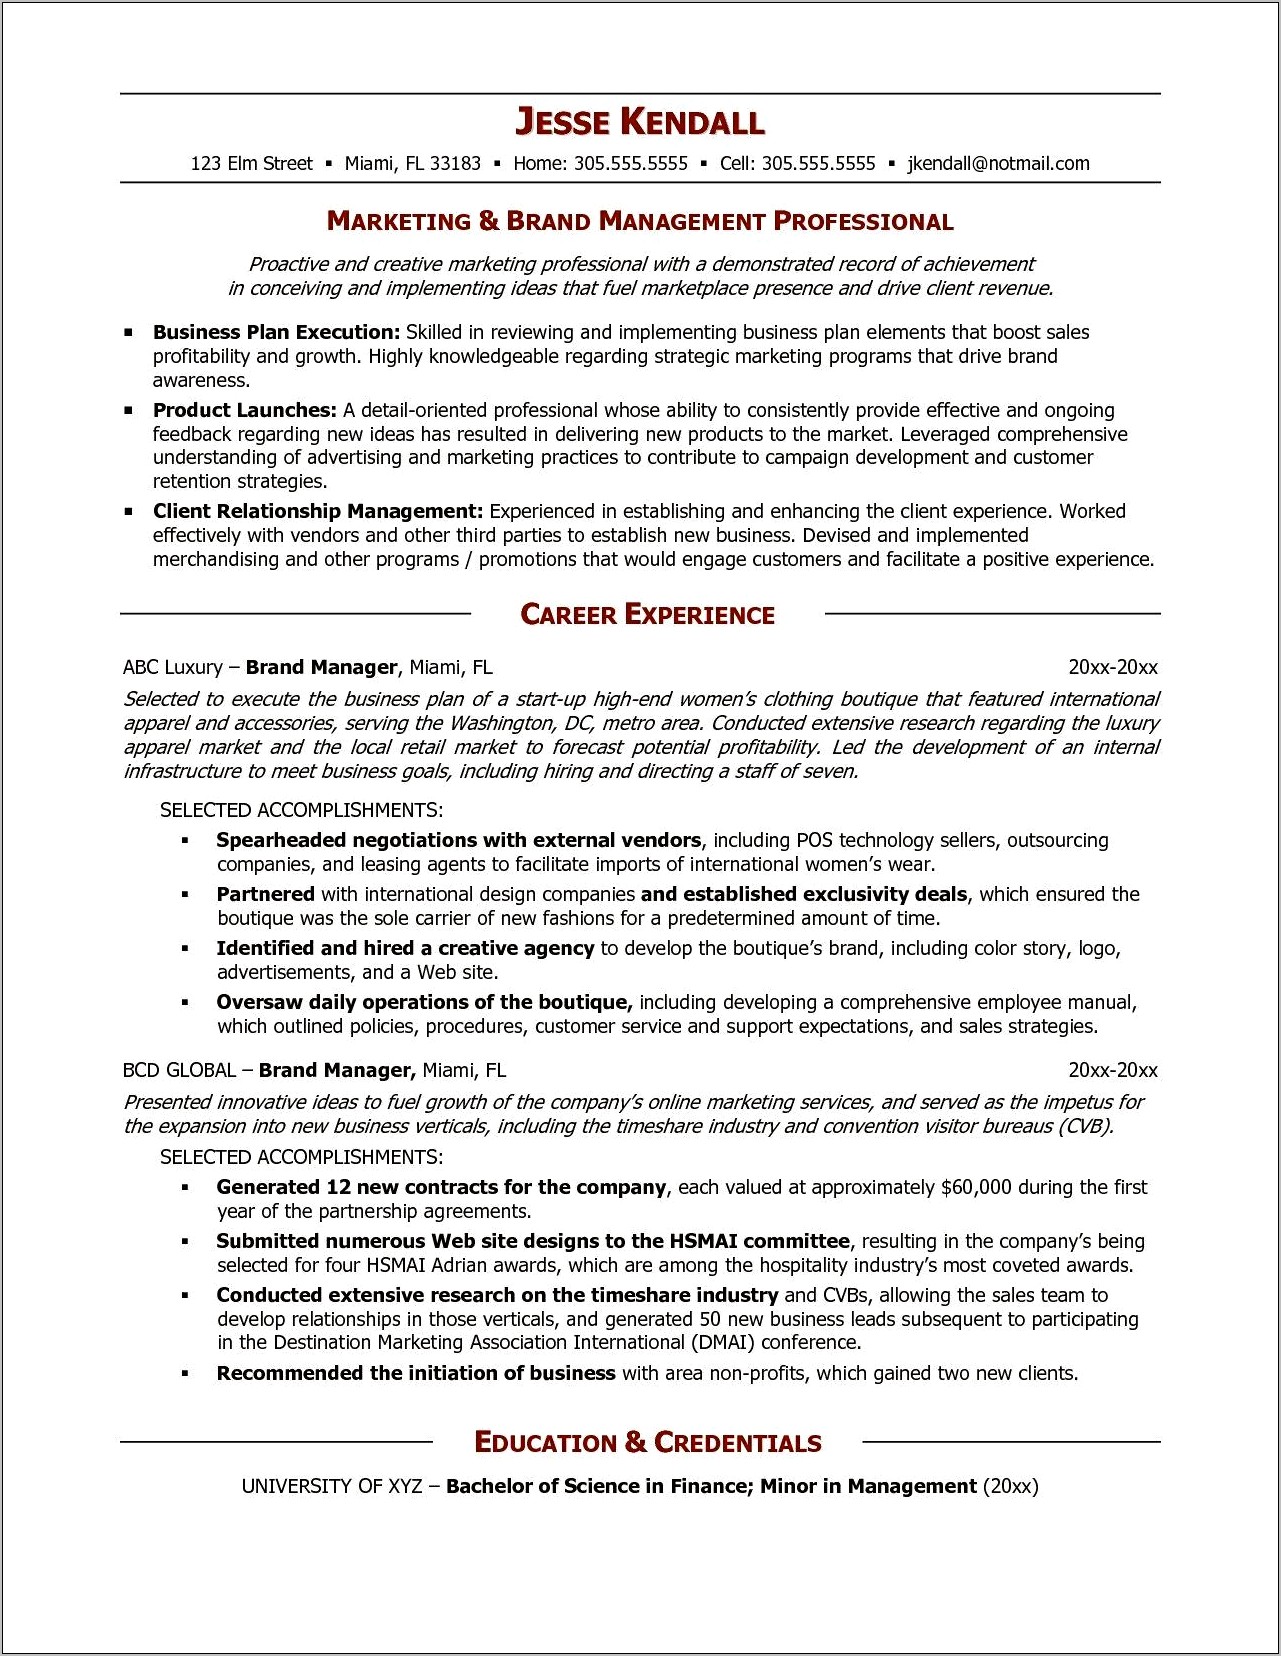 Career Objective Brand Manager Resume